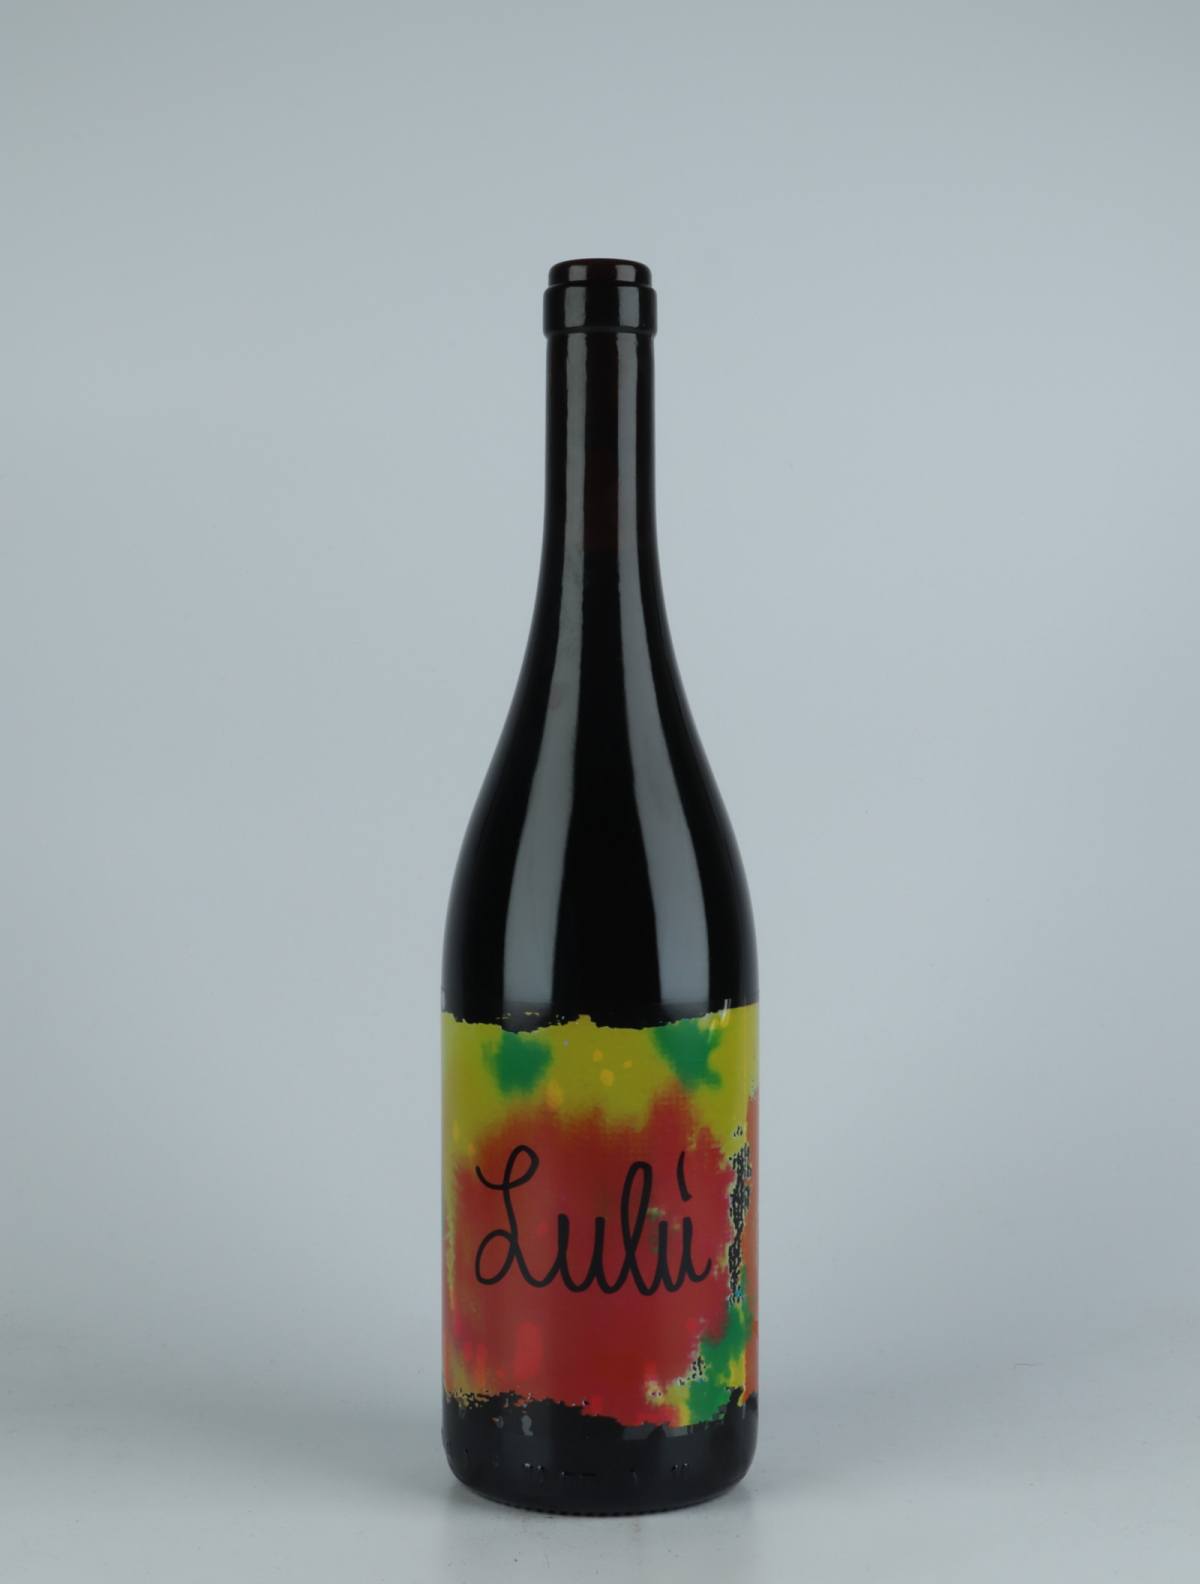 A bottle 2019 Lulù Red wine from Le Coste, Lazio in Italy